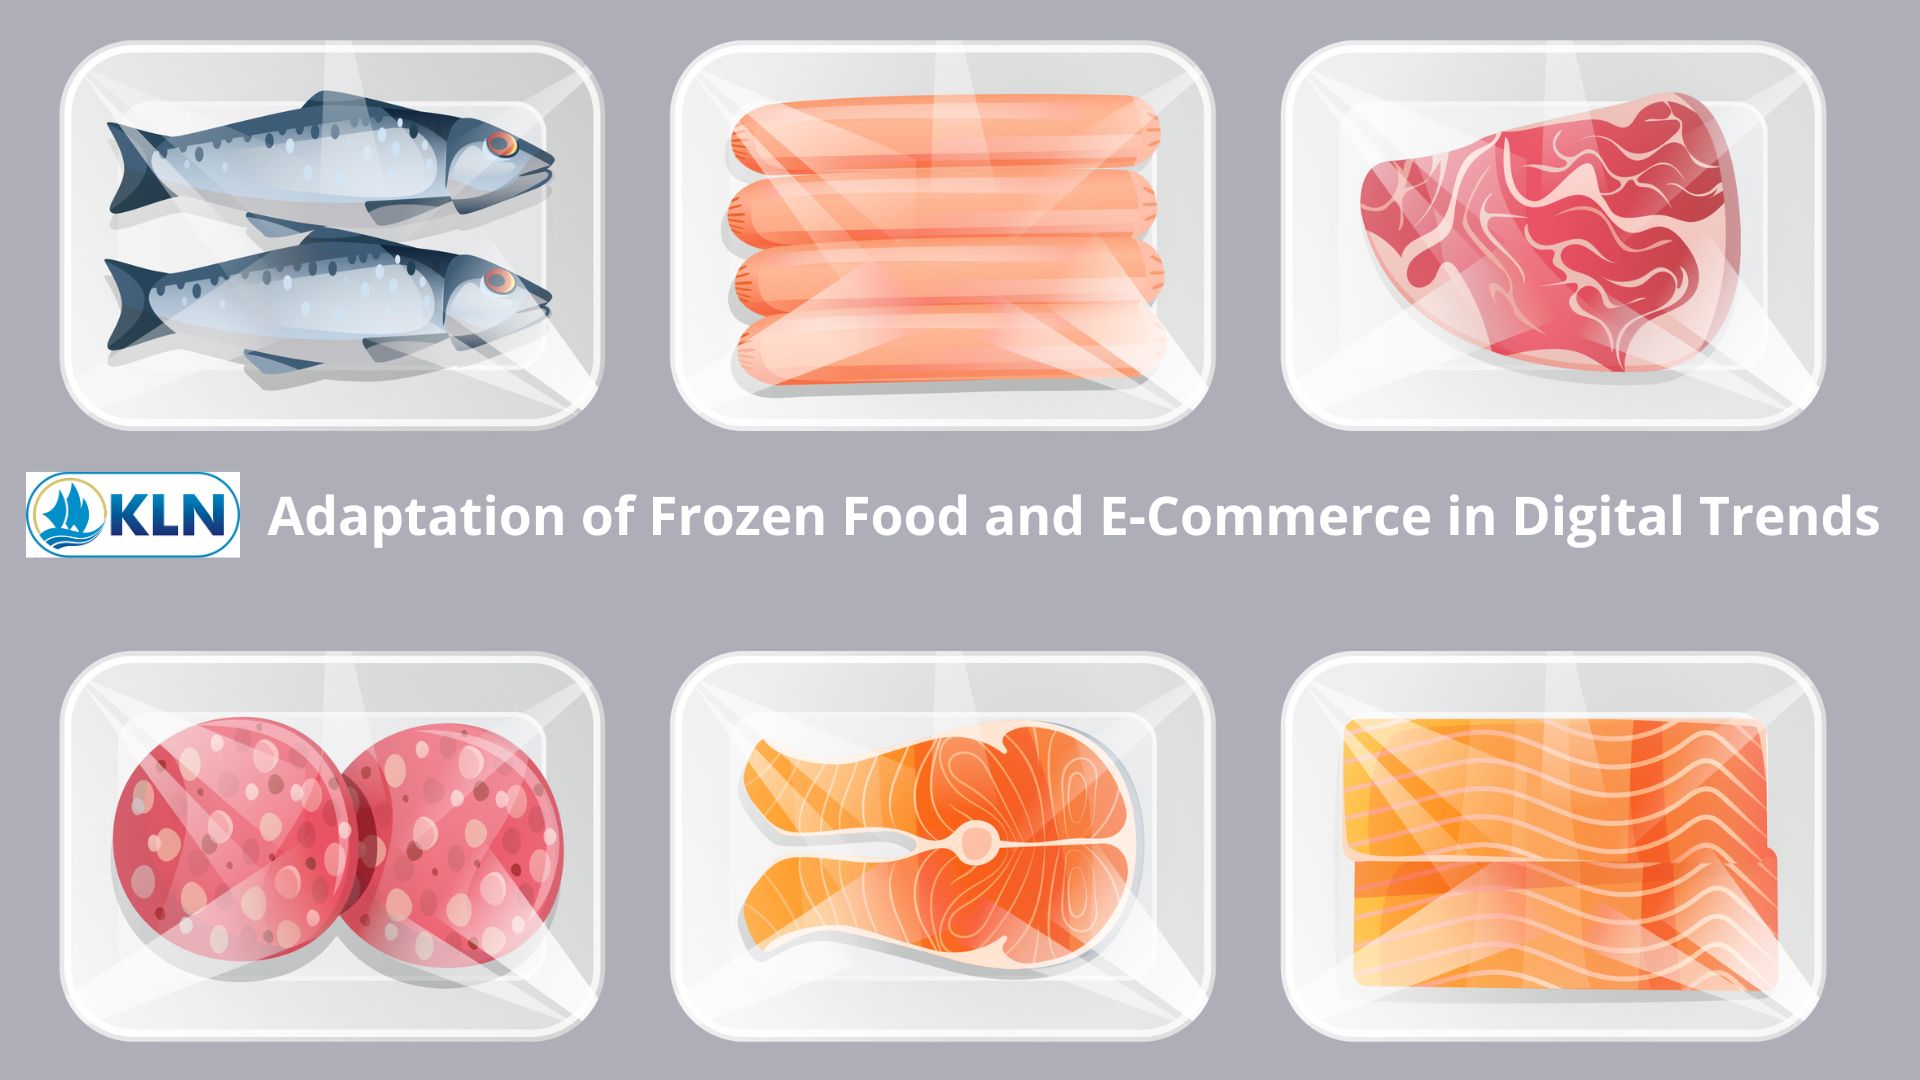 Adaptation of Frozen Food and E-Commerce in Digital Trends